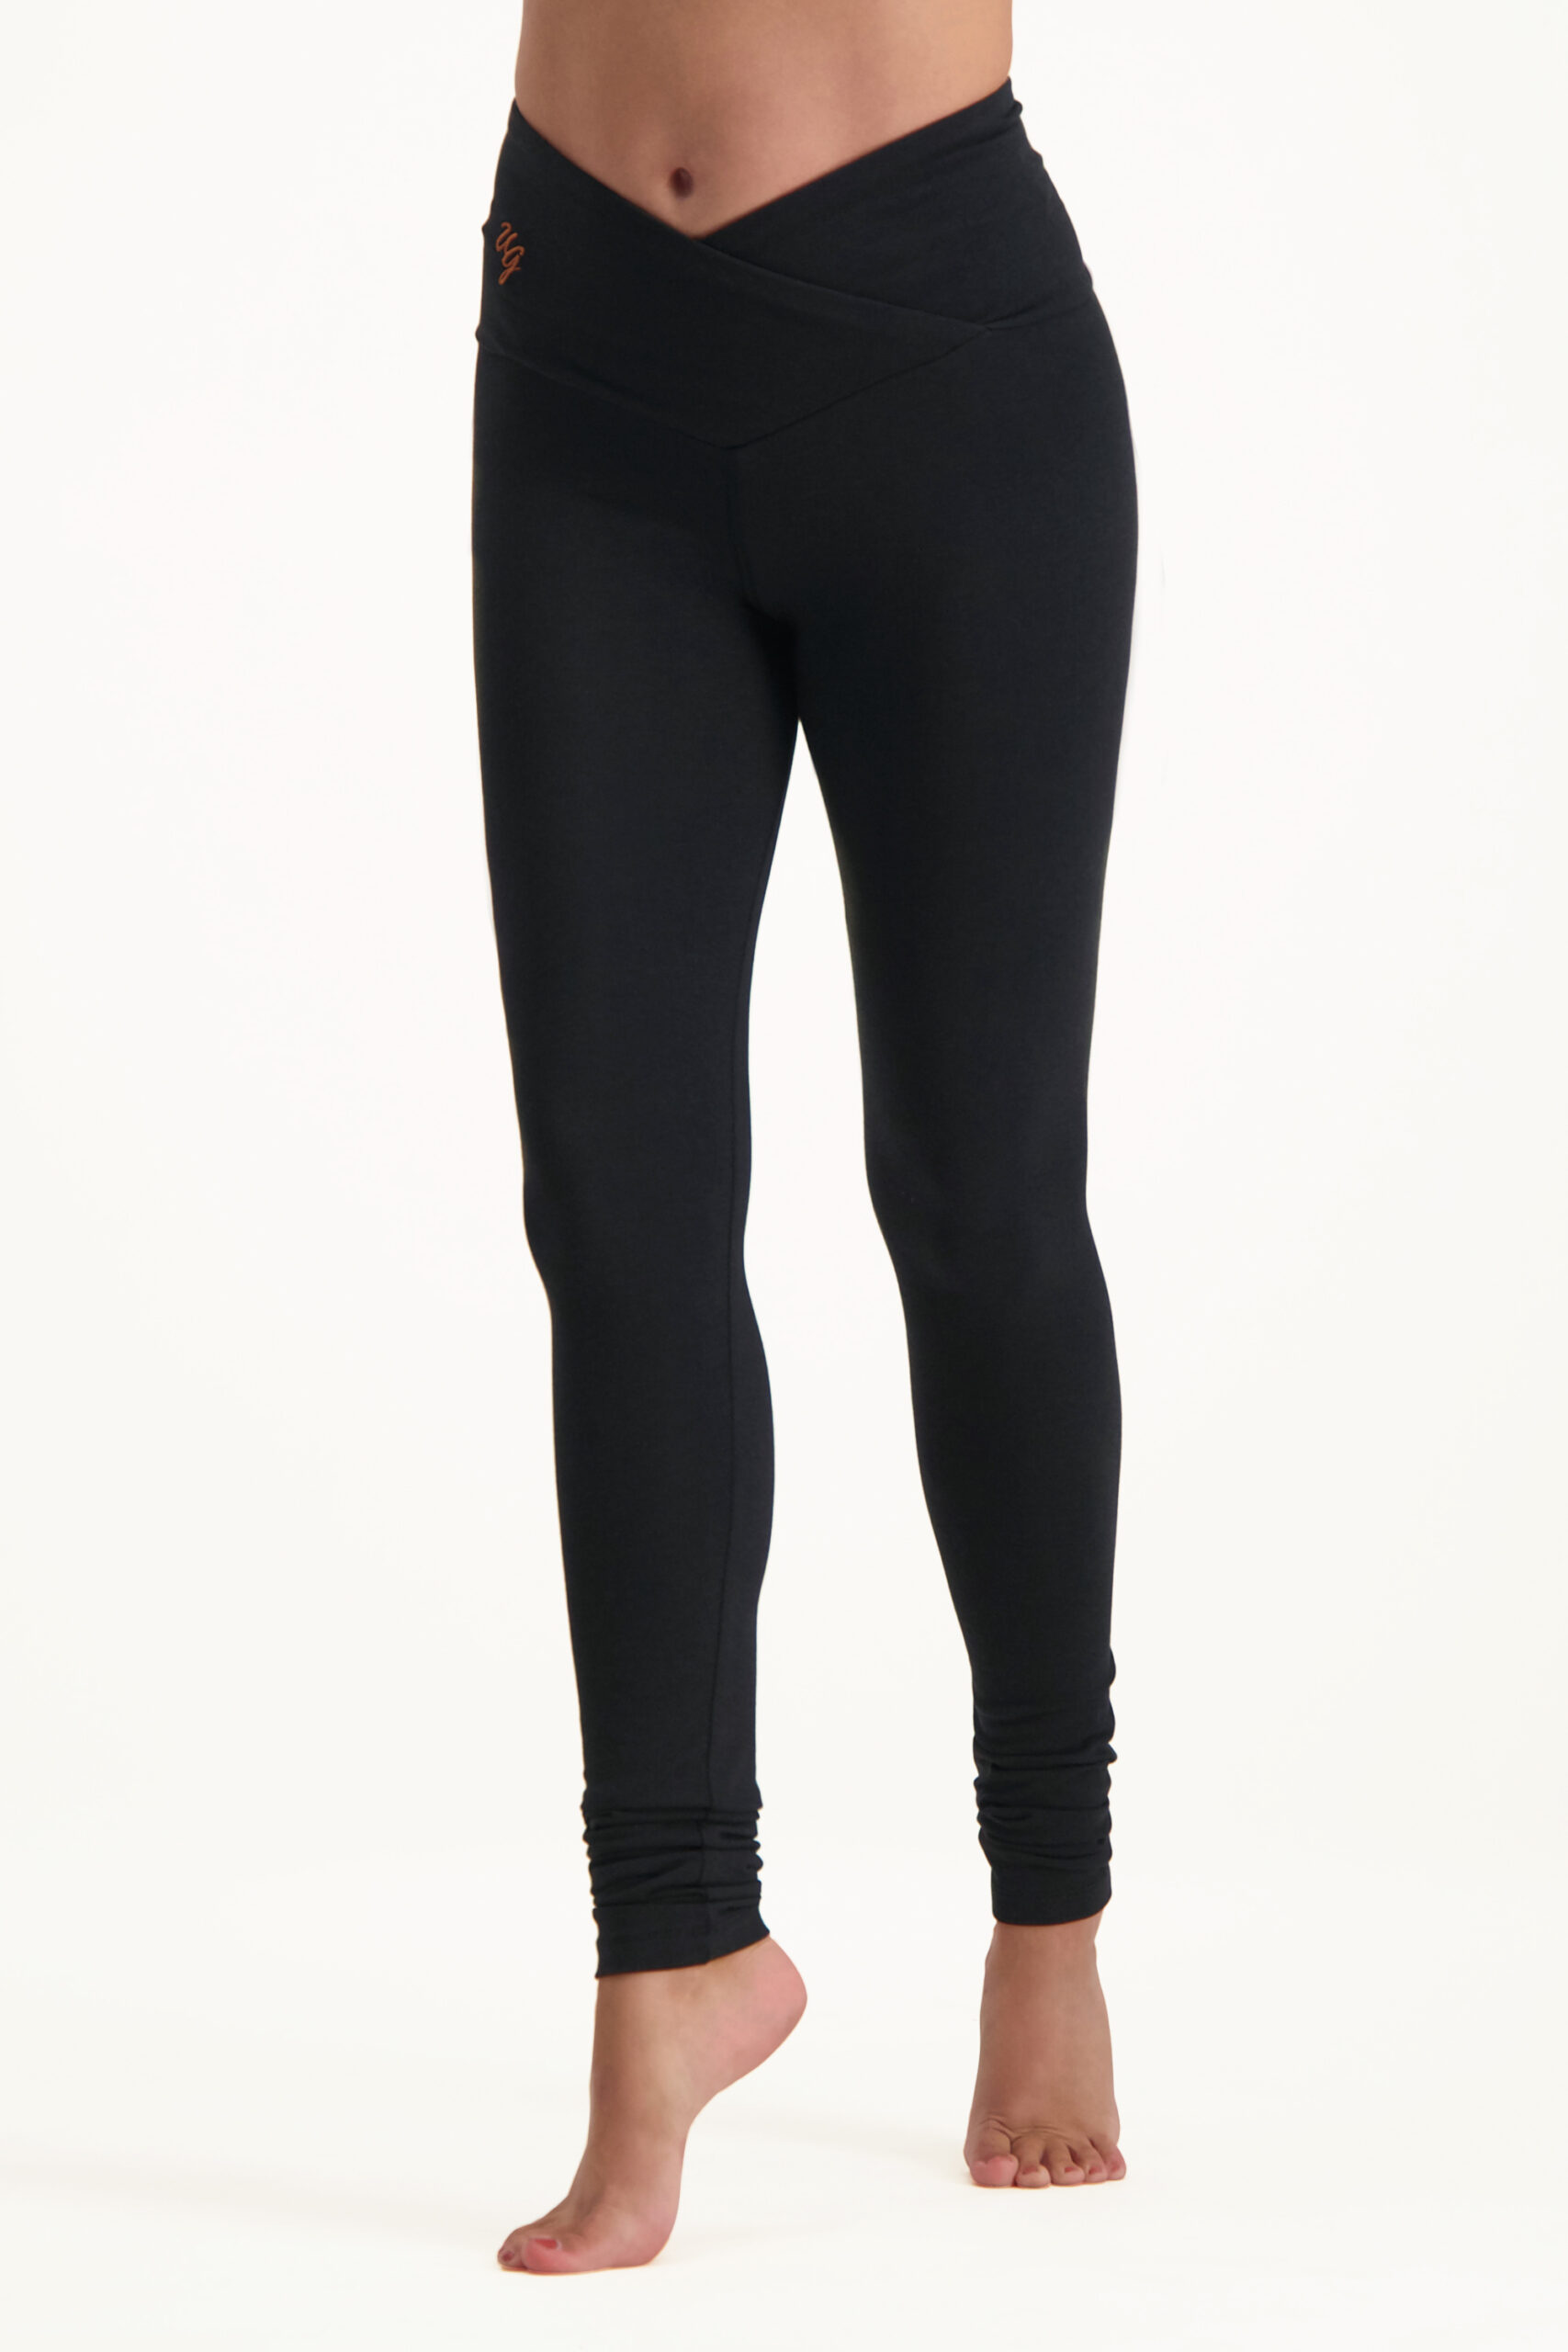 products sati leggings urban black front model scaled 1